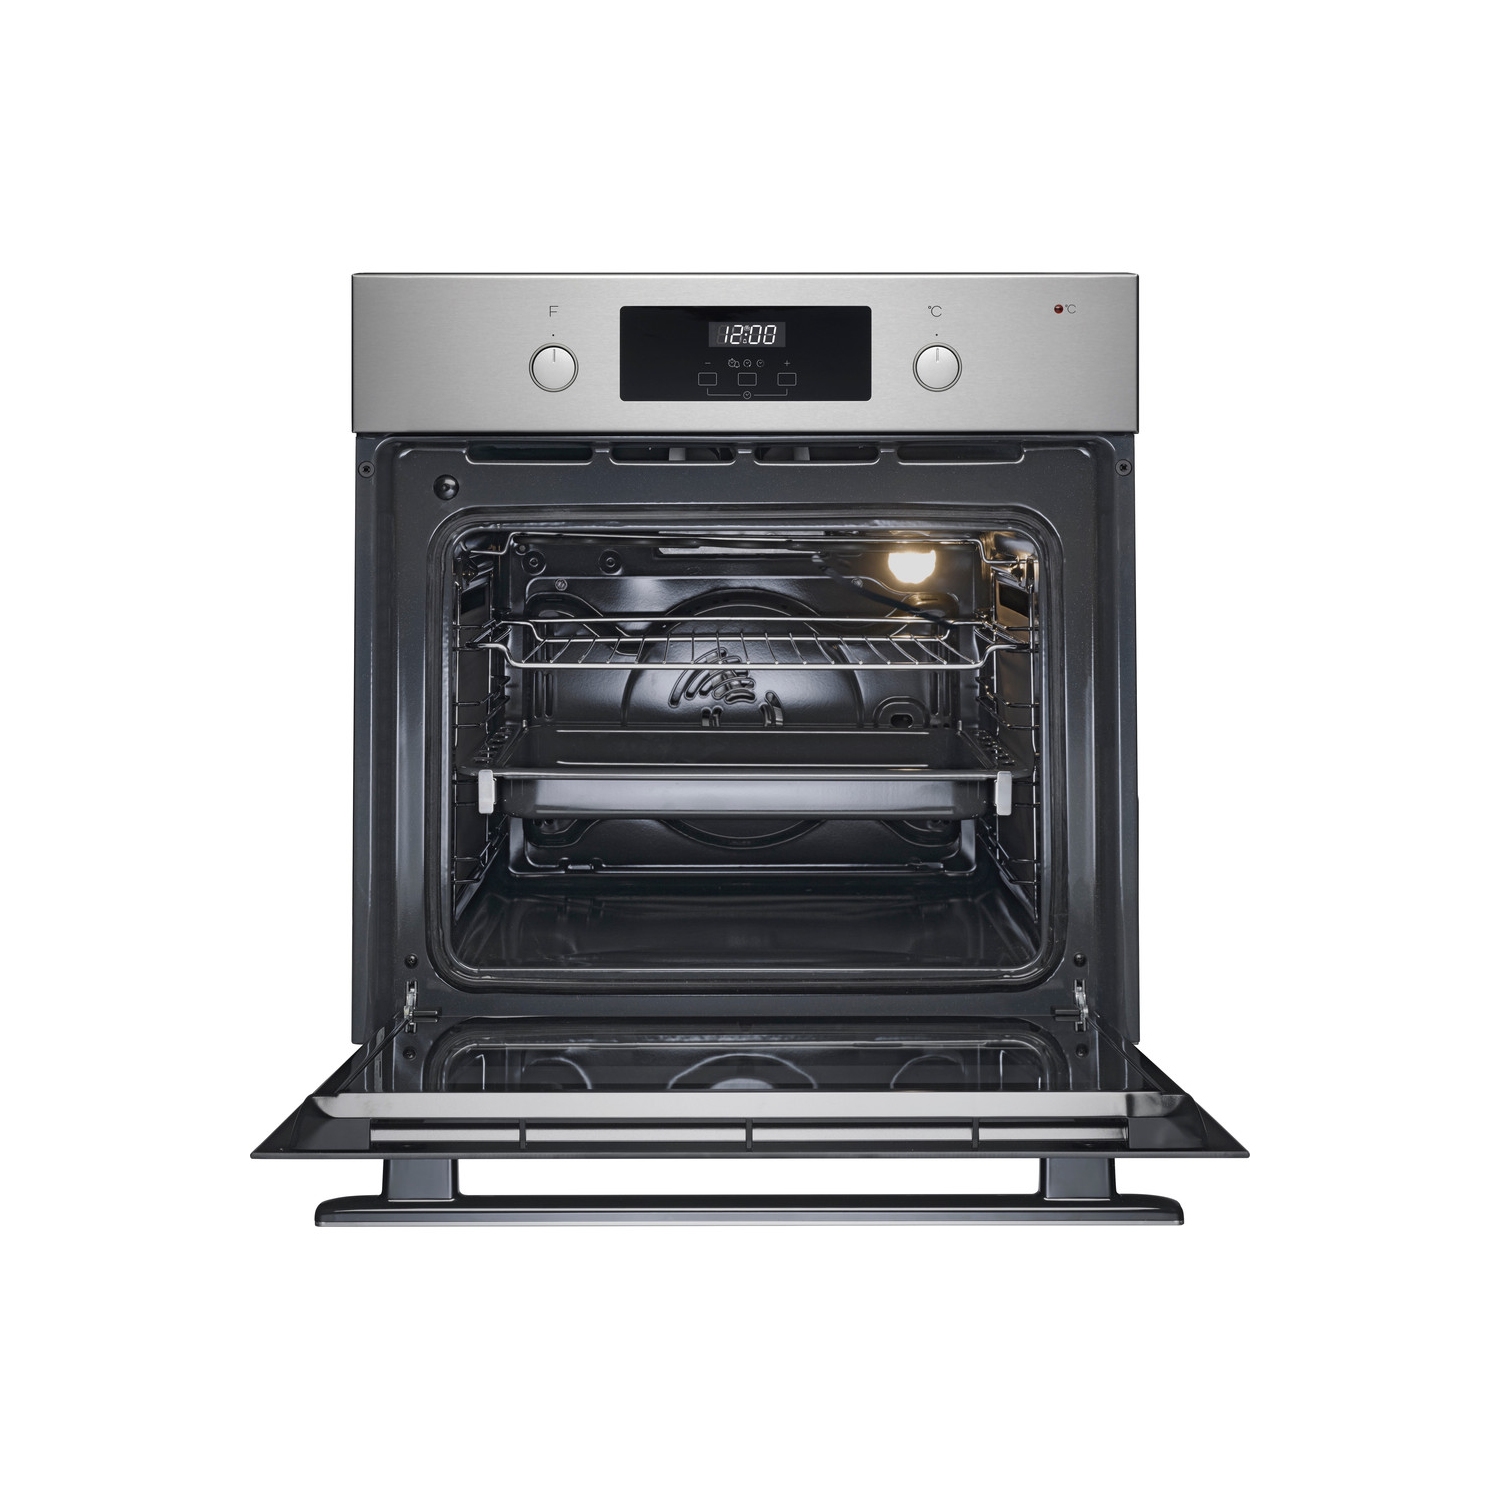 Whirlpool 60cm Built-In Electric Oven - Stainless Steel - A Rated - 2